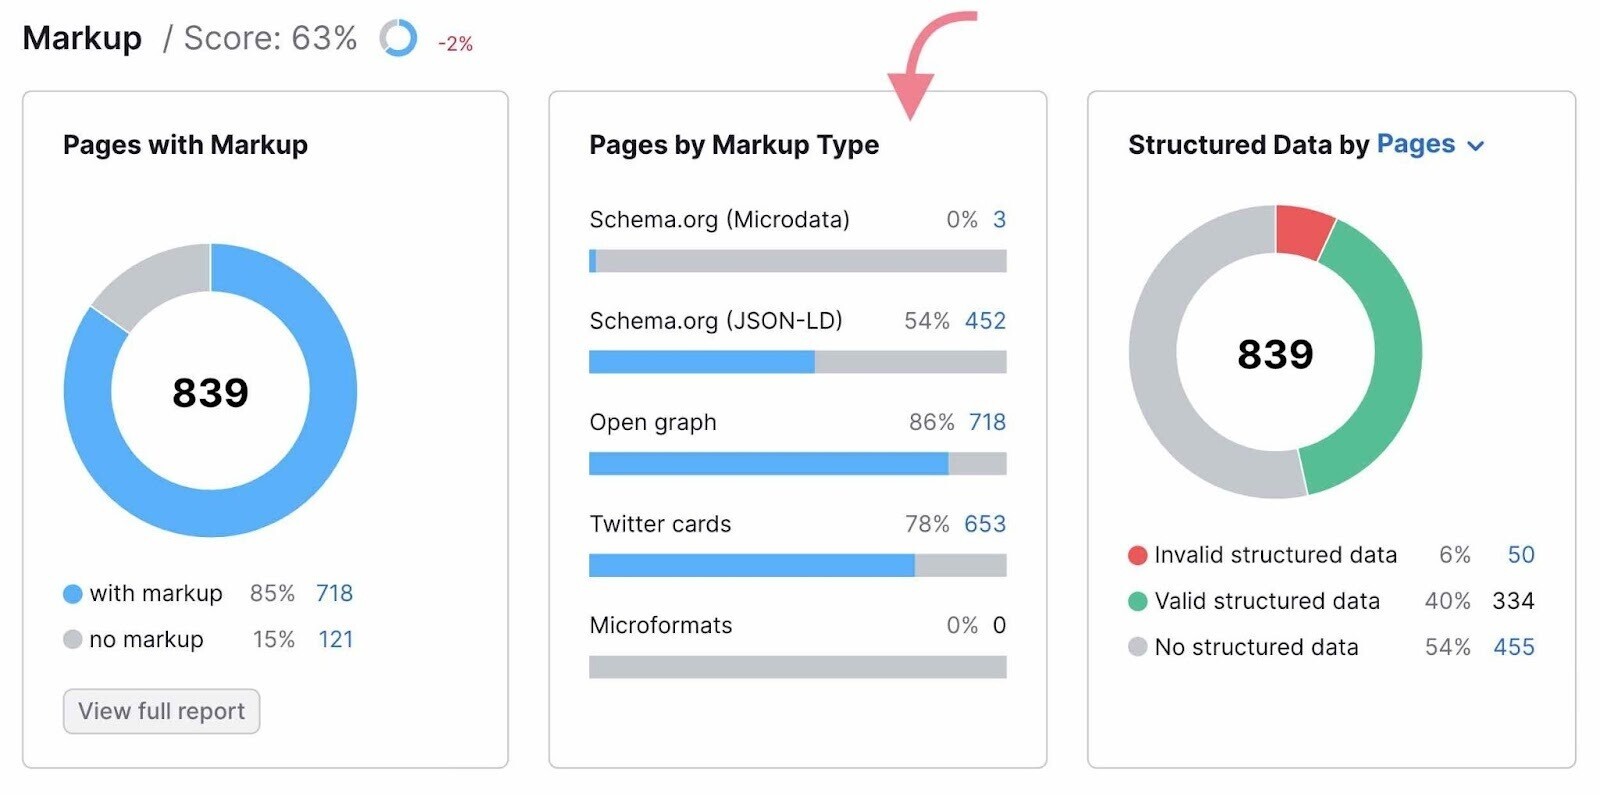 pages by markup type overview